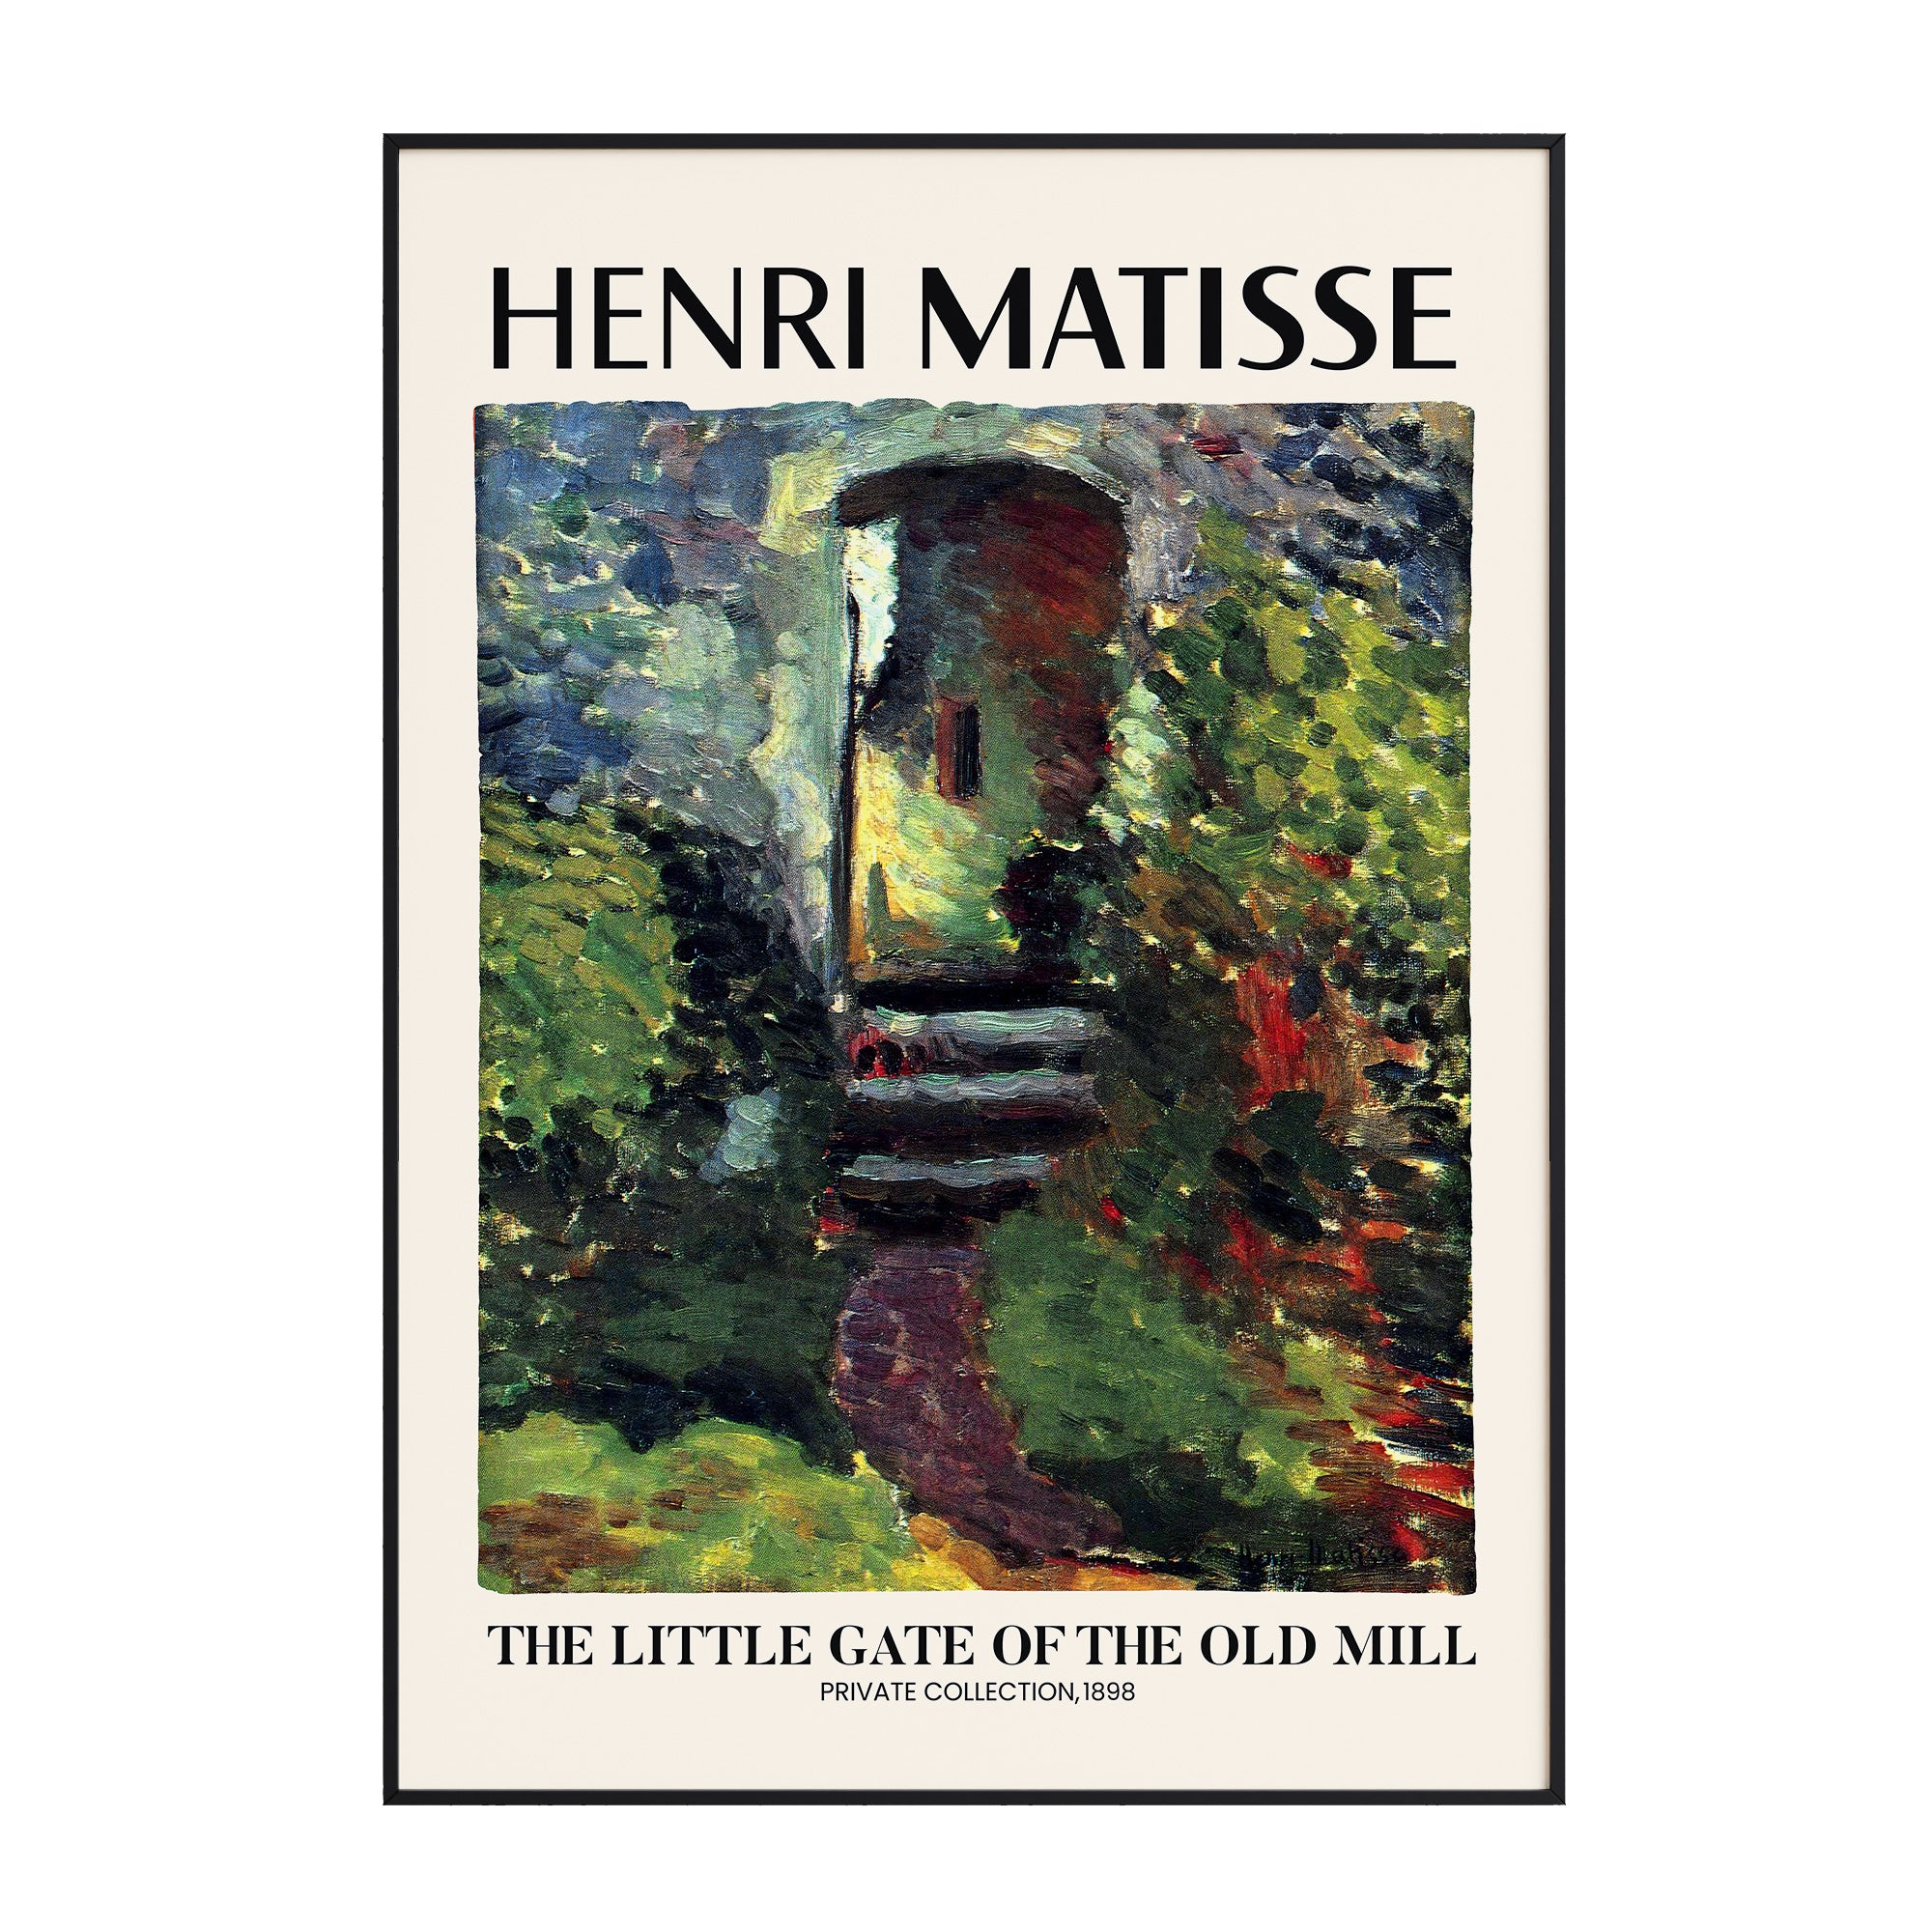 Henri Matisse - The Little Gate of the Old Mill